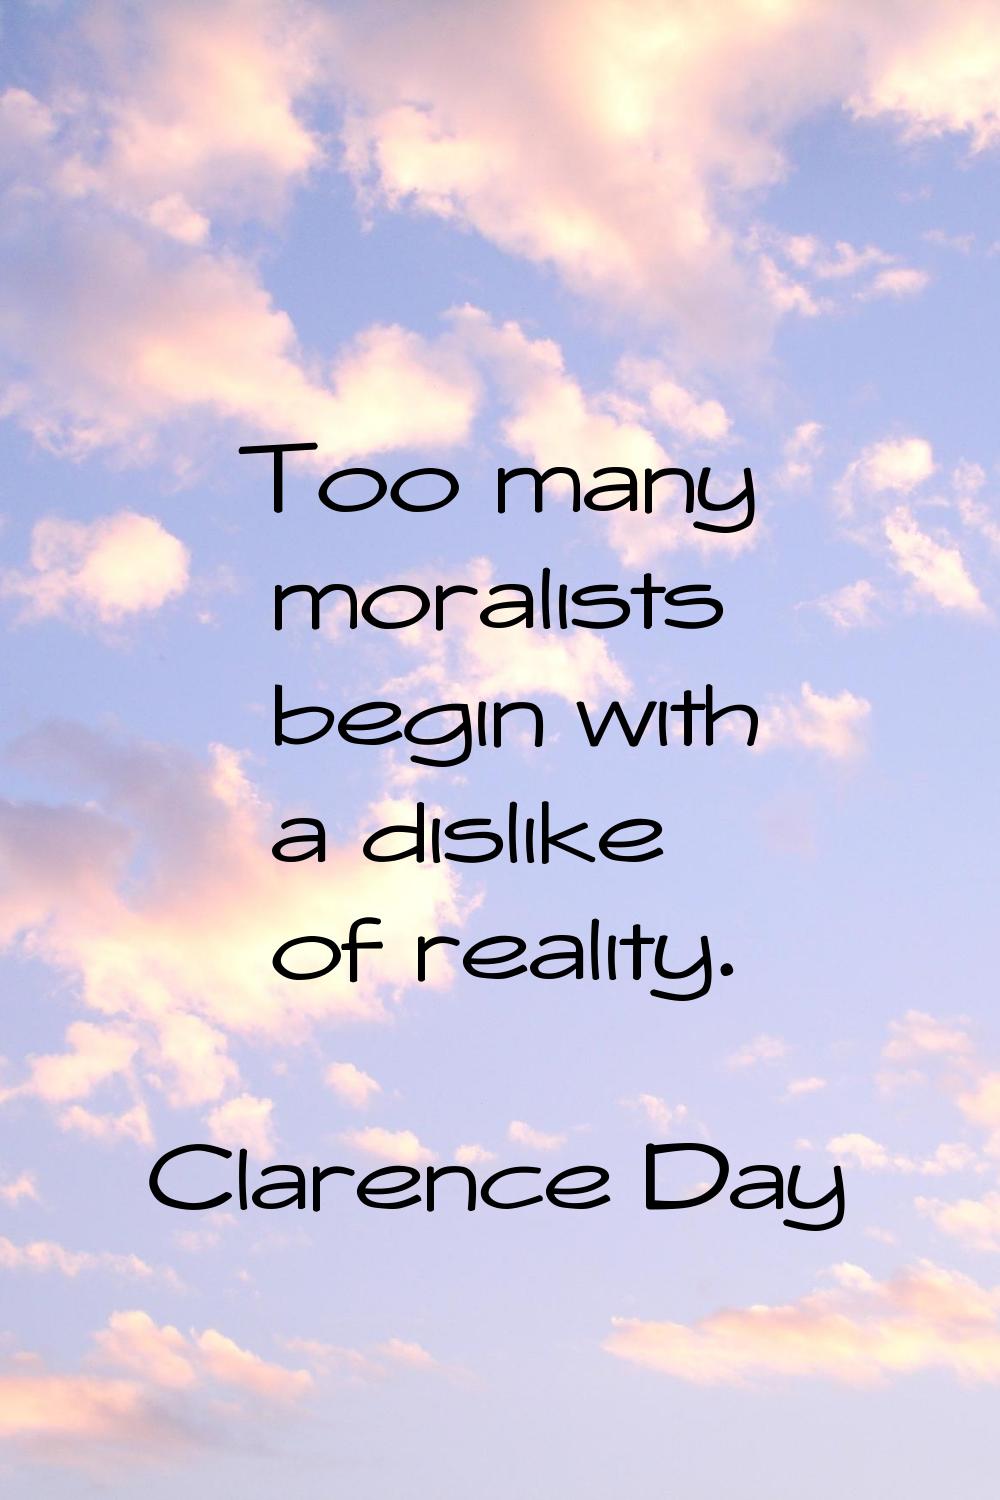 Too many moralists begin with a dislike of reality.